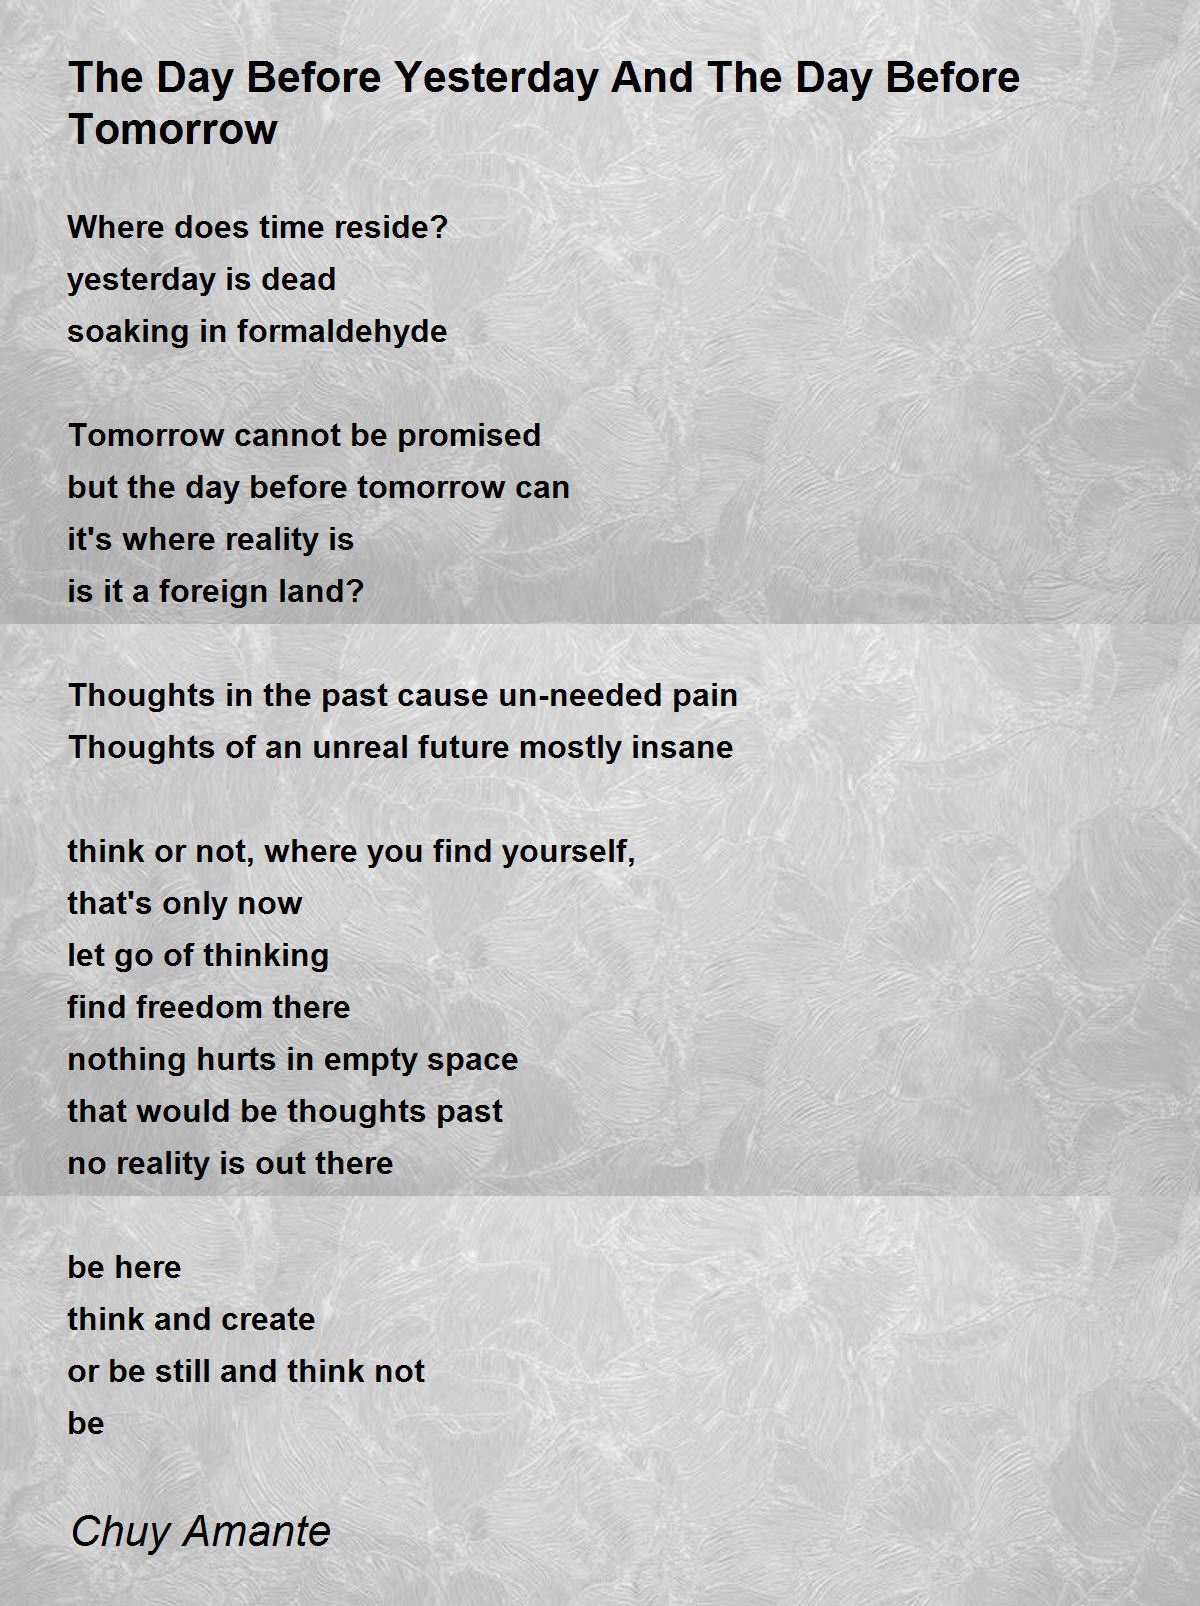 The Day Before Yesterday And The Day Before Tomorrow - The Day Before  Yesterday And The Day Before Tomorrow Poem by Chuy Amante